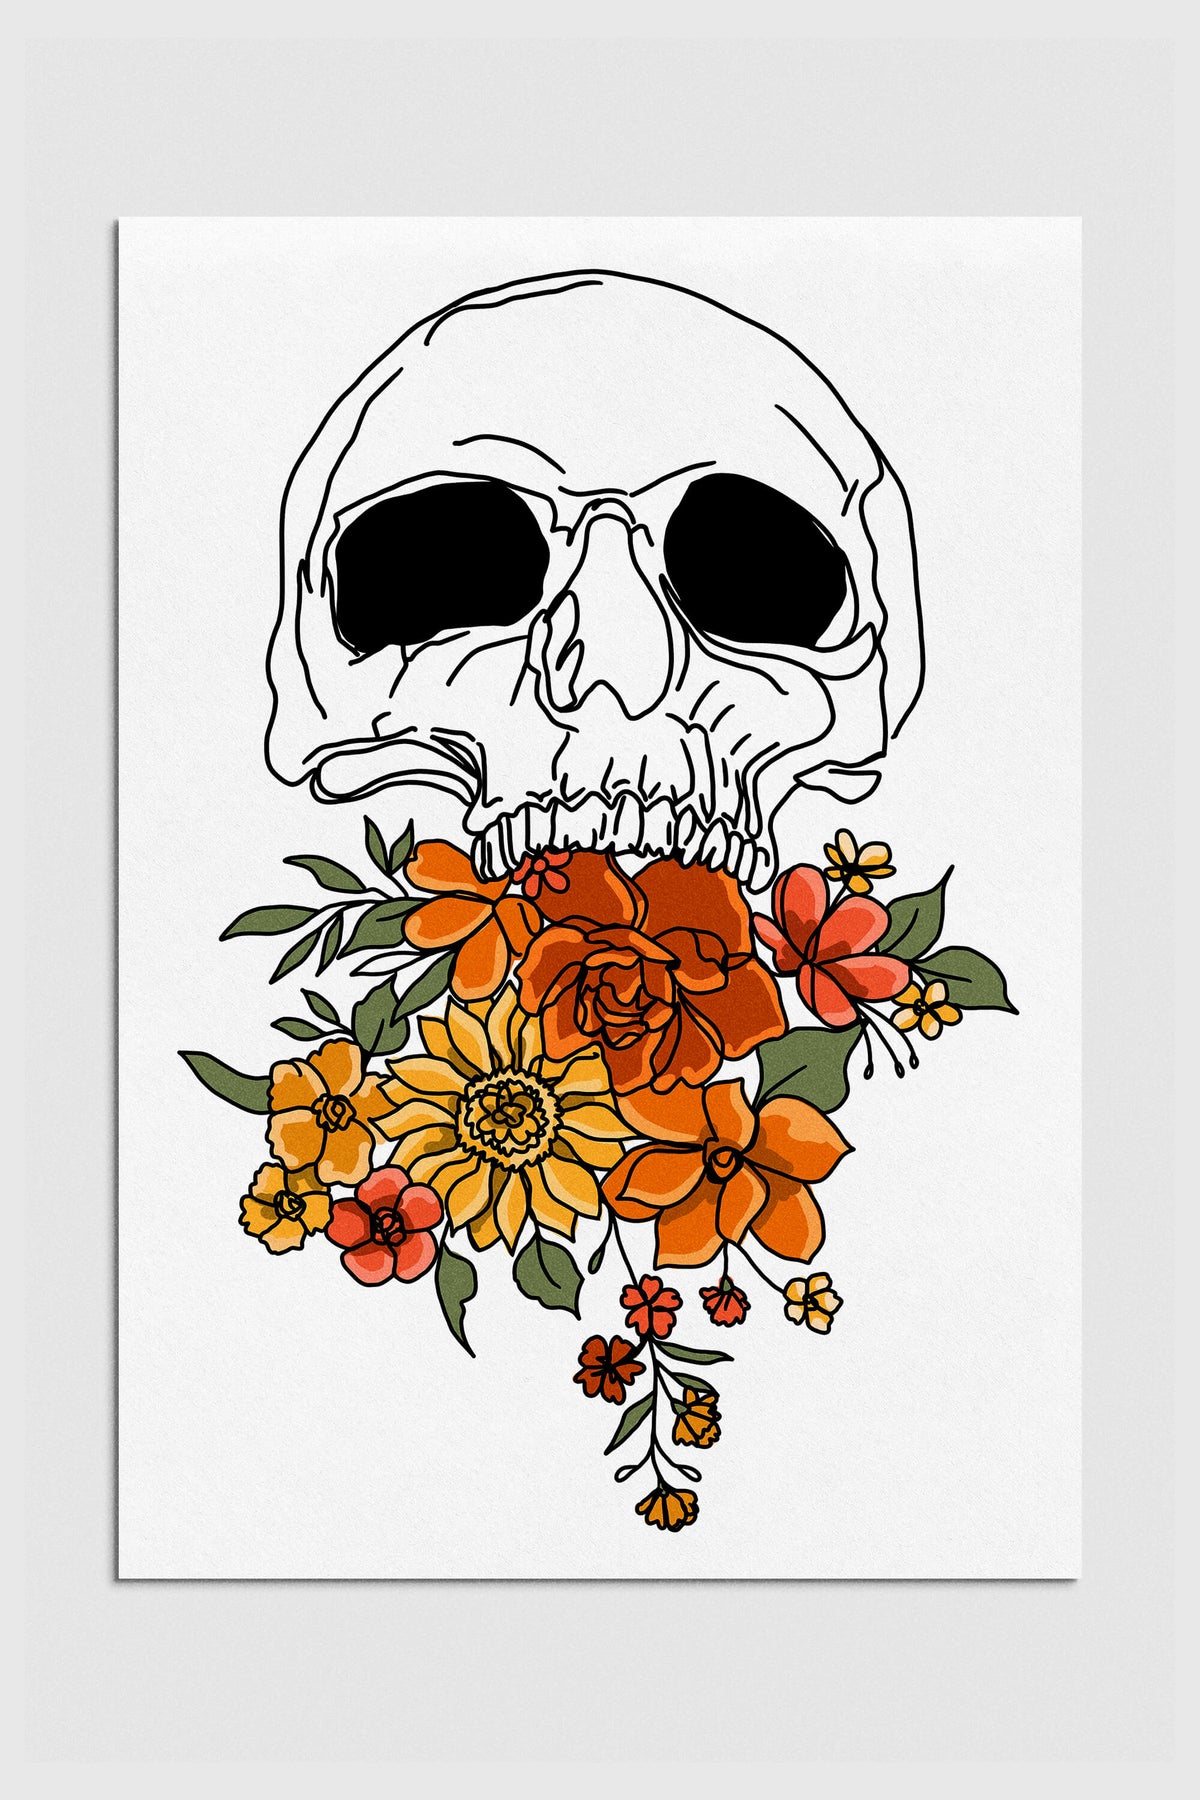 Floral Skull Artwork blending Gothic and abstract styles, perfect for unique home wall decor.